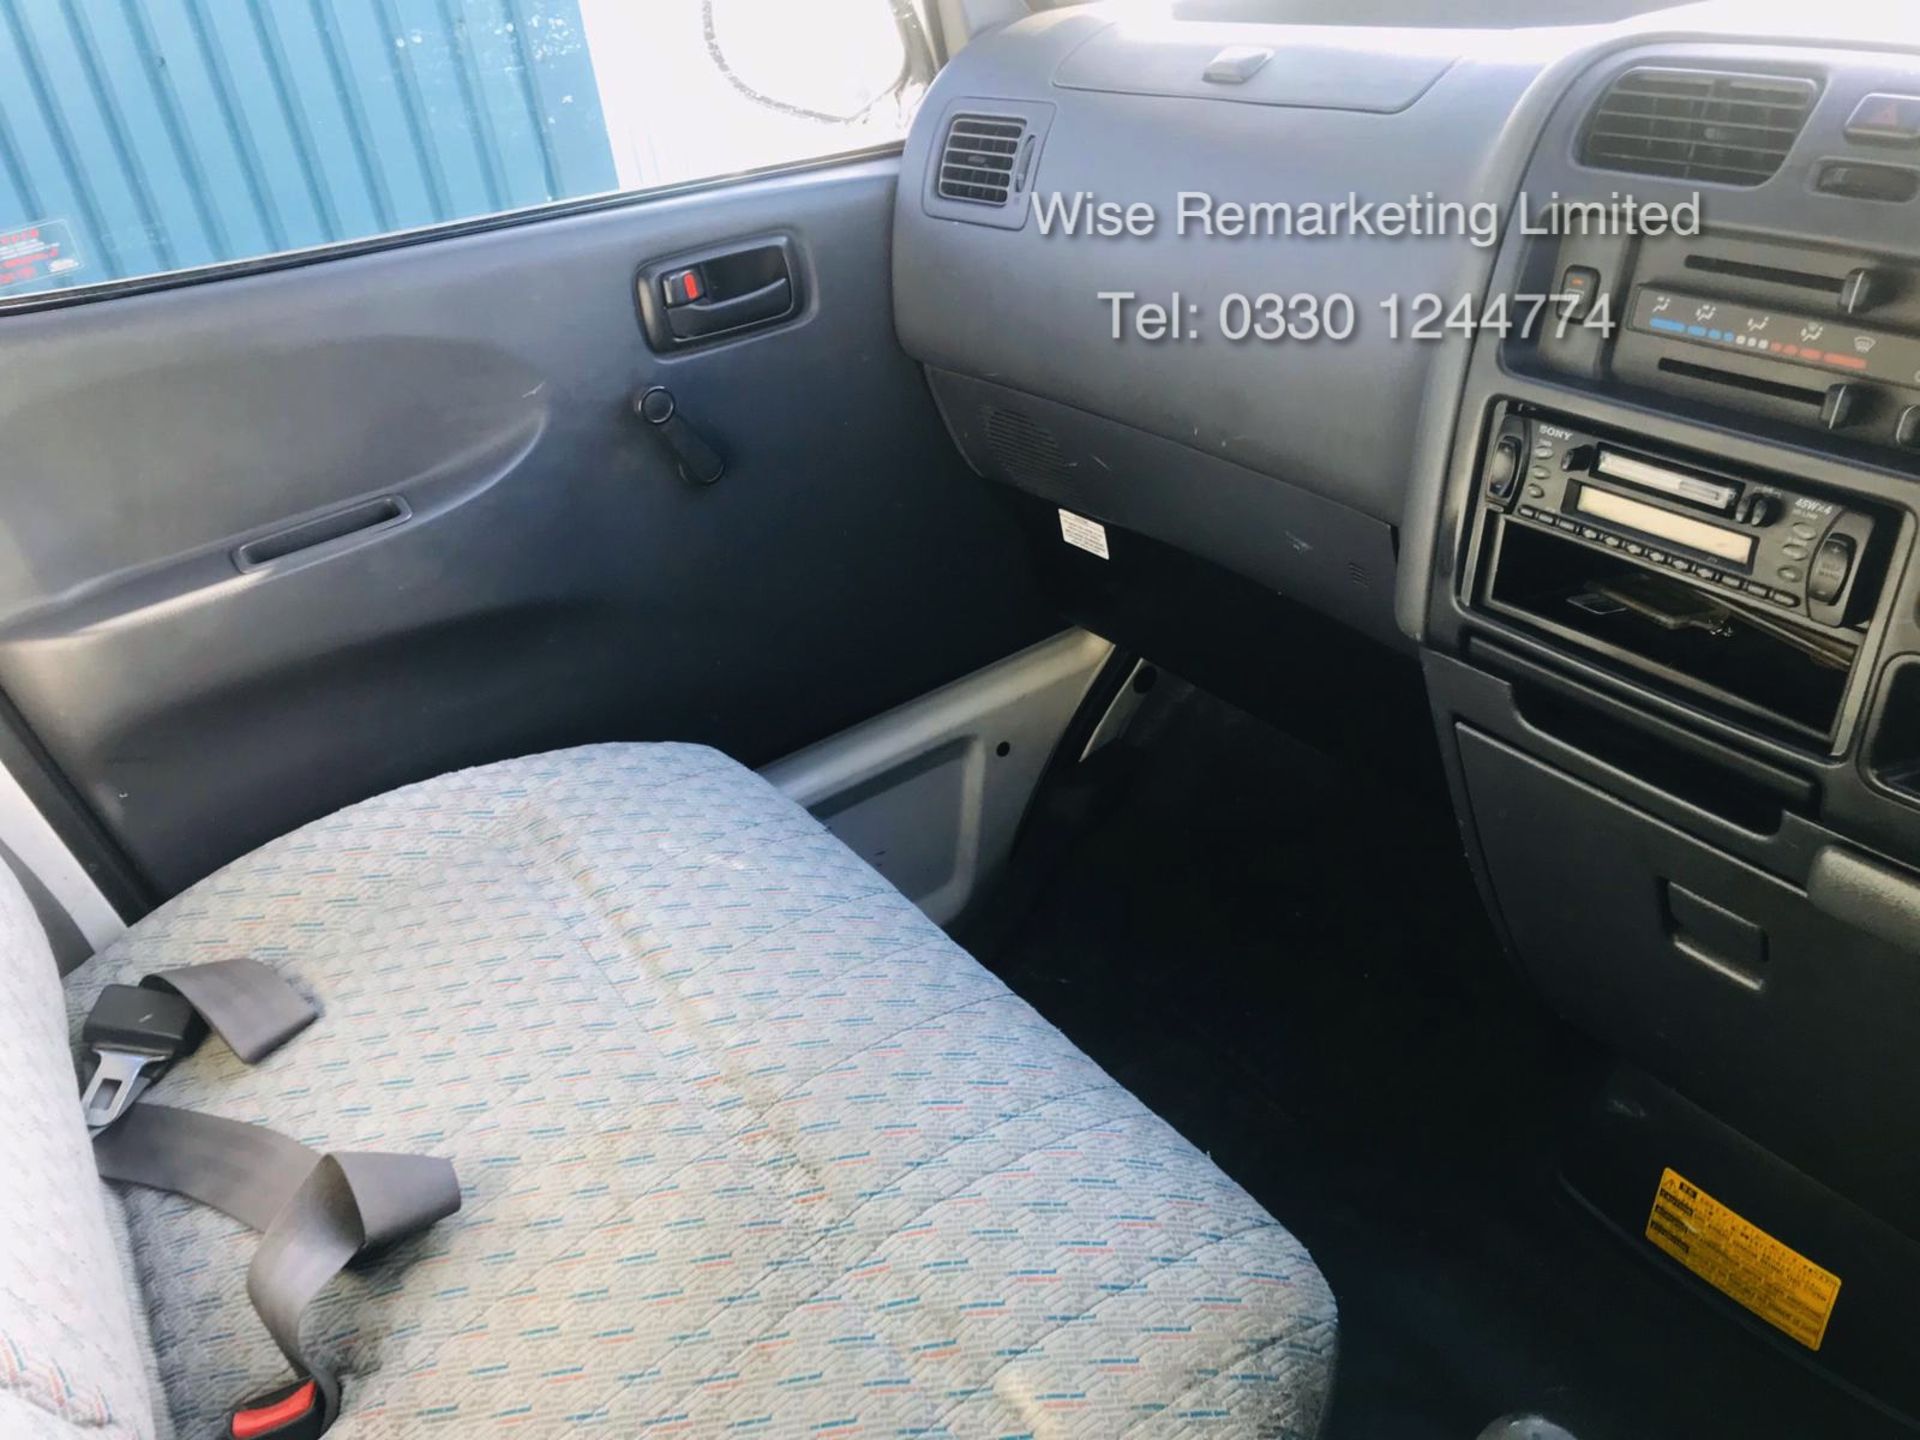 Toyota Hiace 300 GS 2.5 D4D - 2003 03 Reg - 1 Keeper From New - 3 Seater - Roof Rack - Image 10 of 15